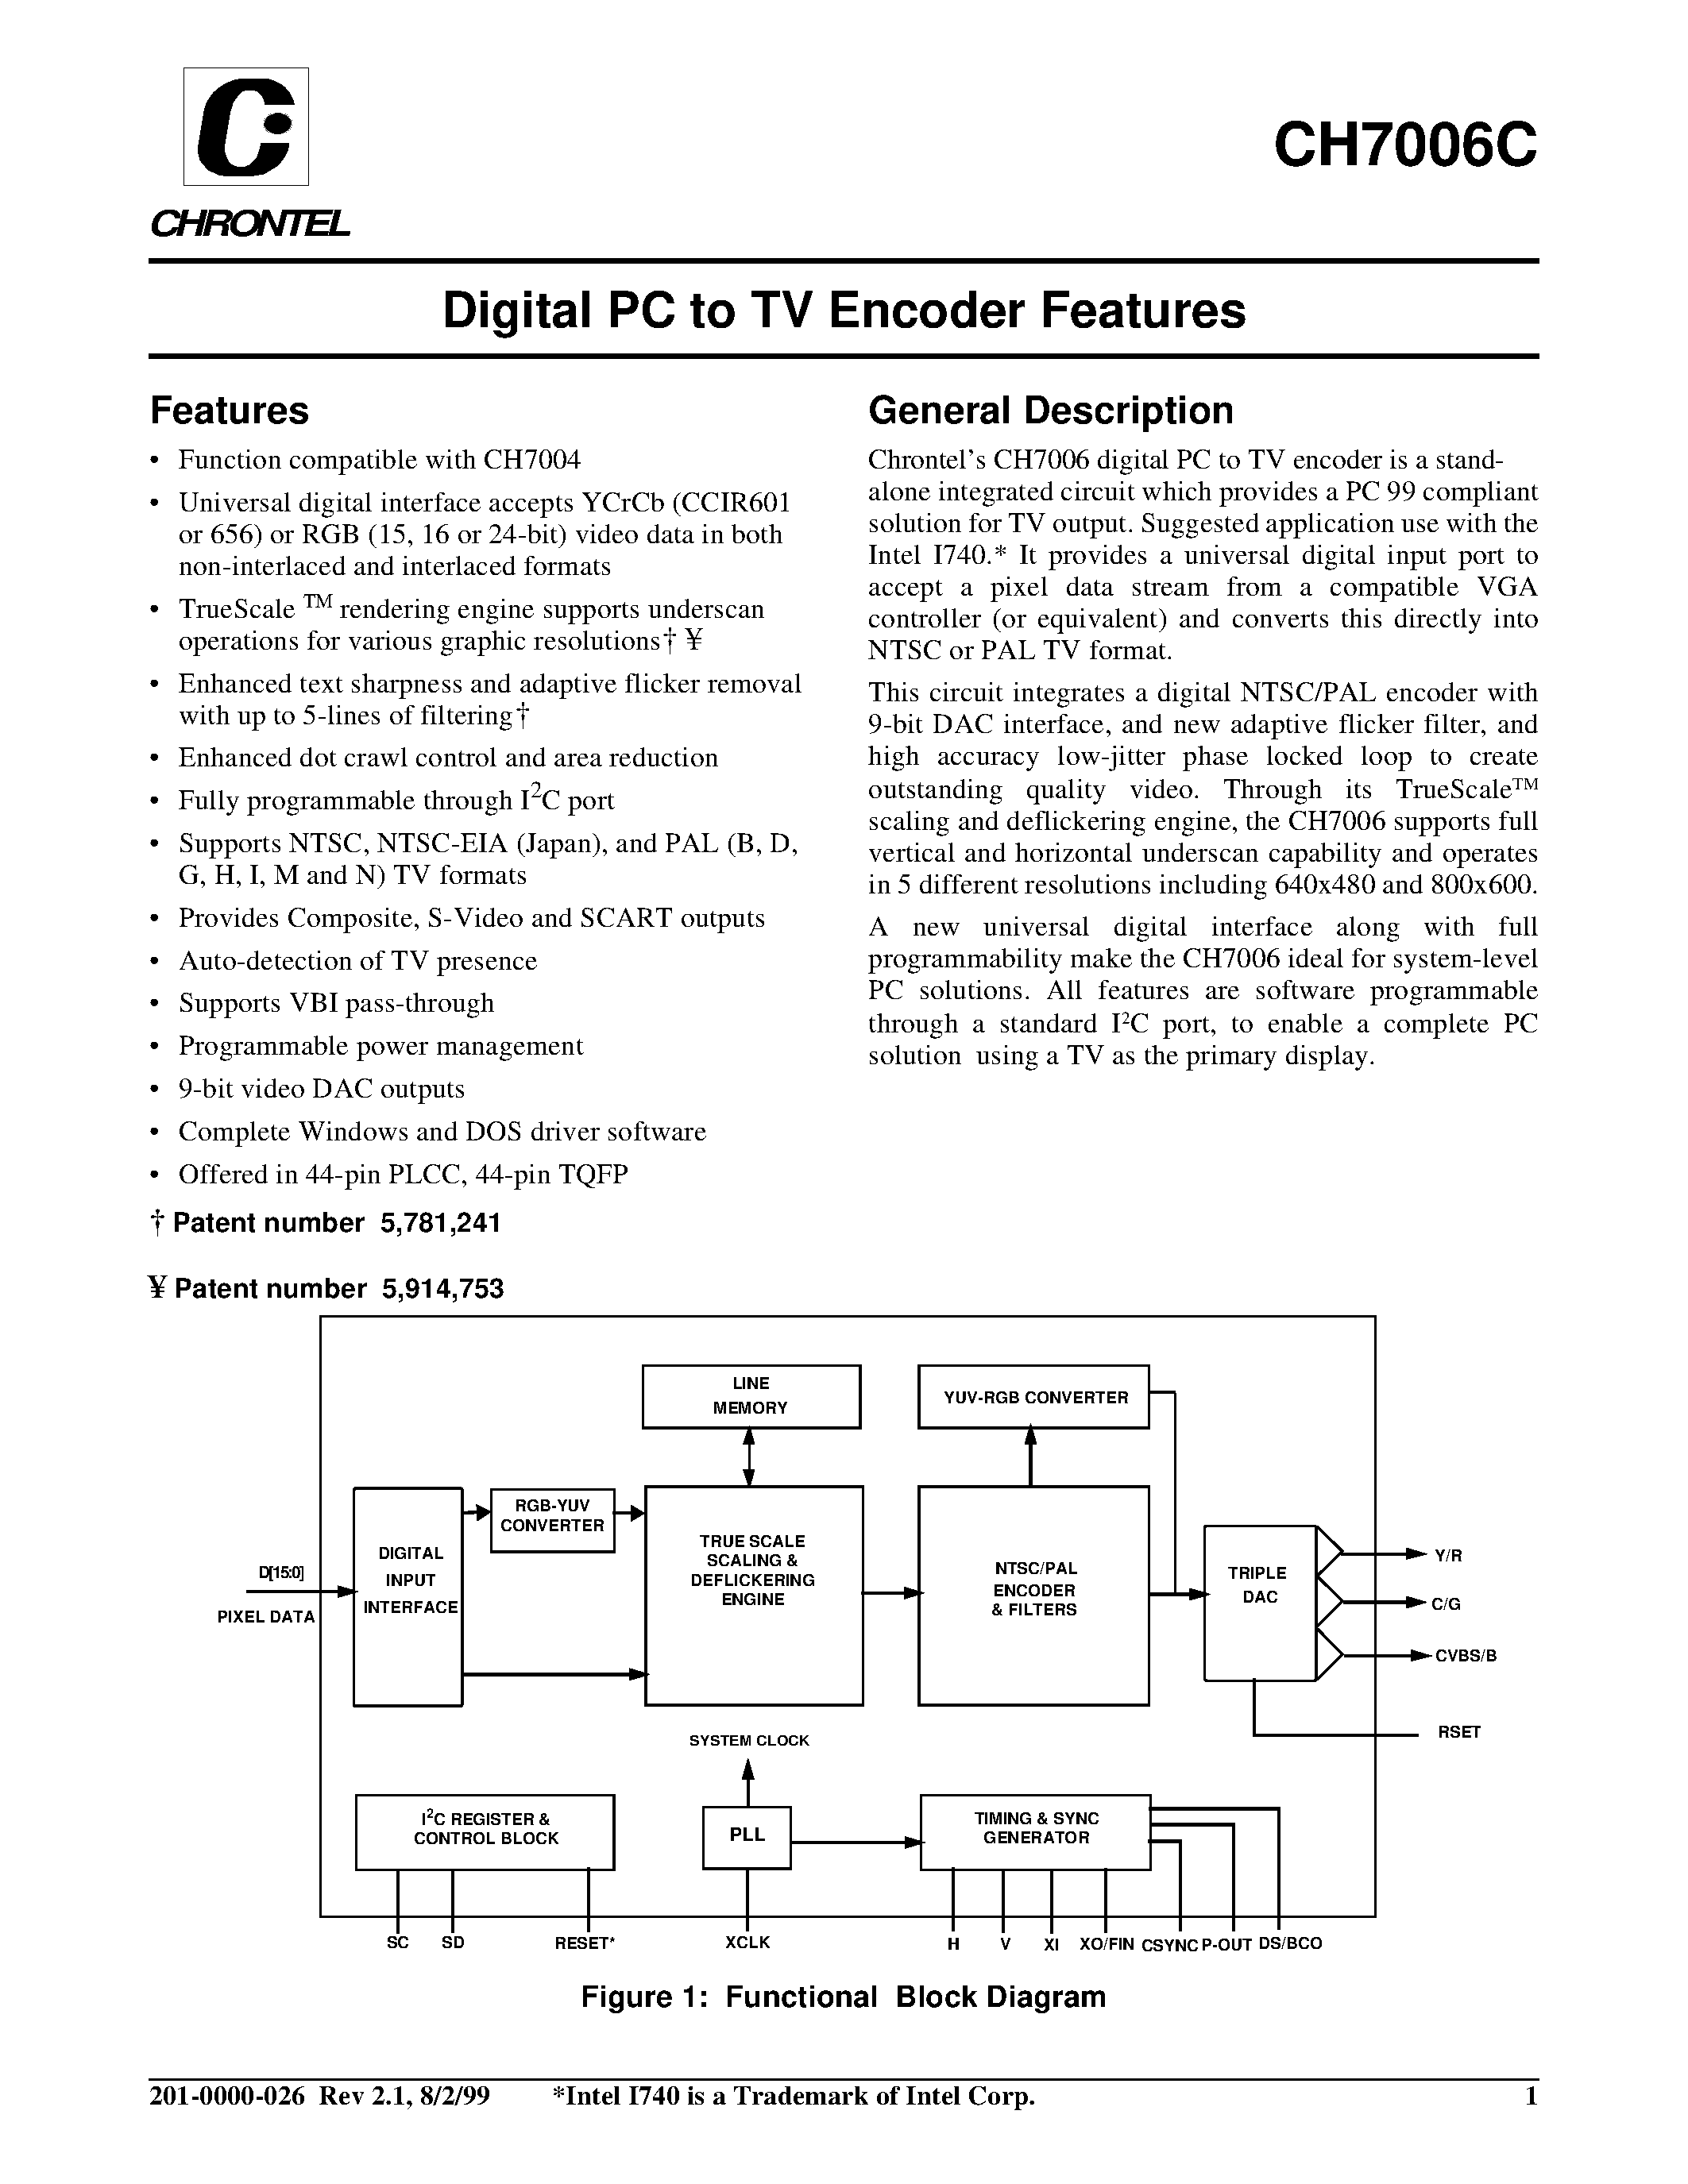 Datasheet CH7006C-V - Digital PC to TV Encoder Features page 1